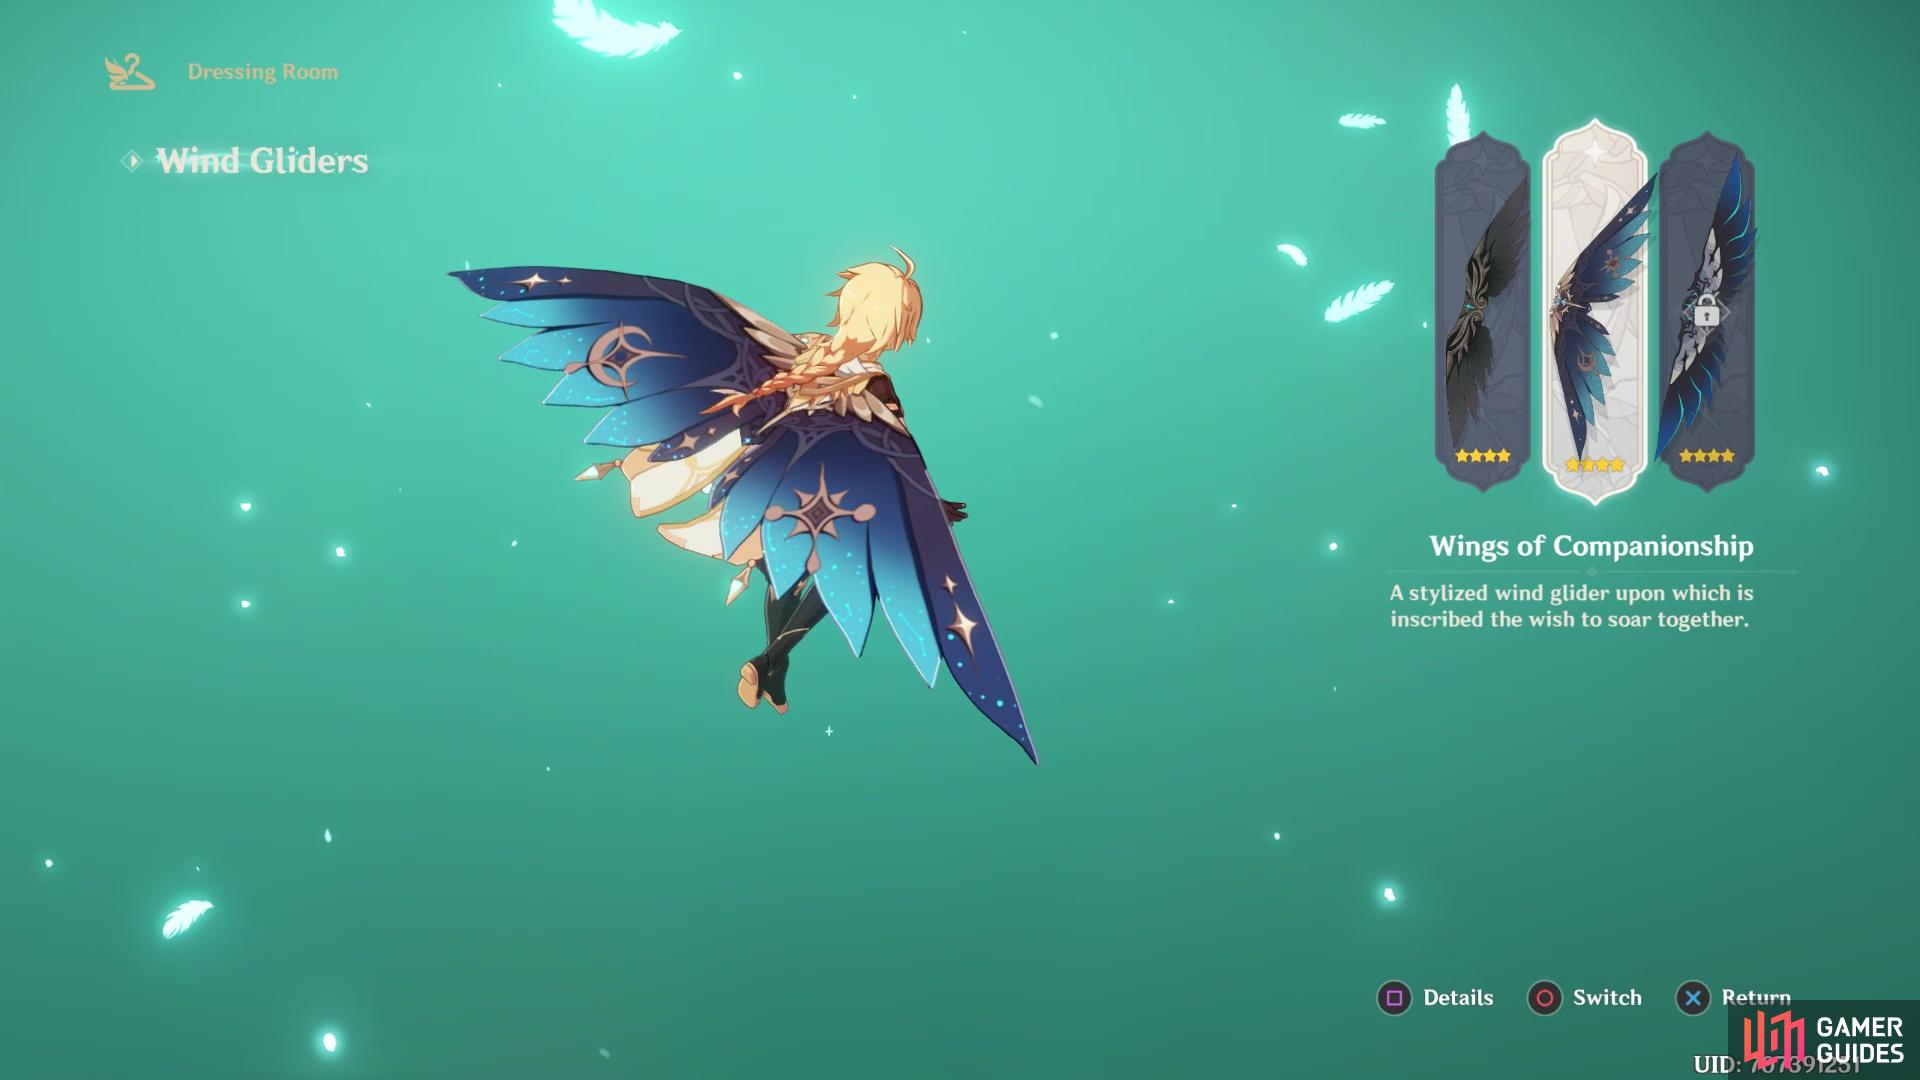 The Dressing Room offers a way to customize your Wind Glider and character outfits.